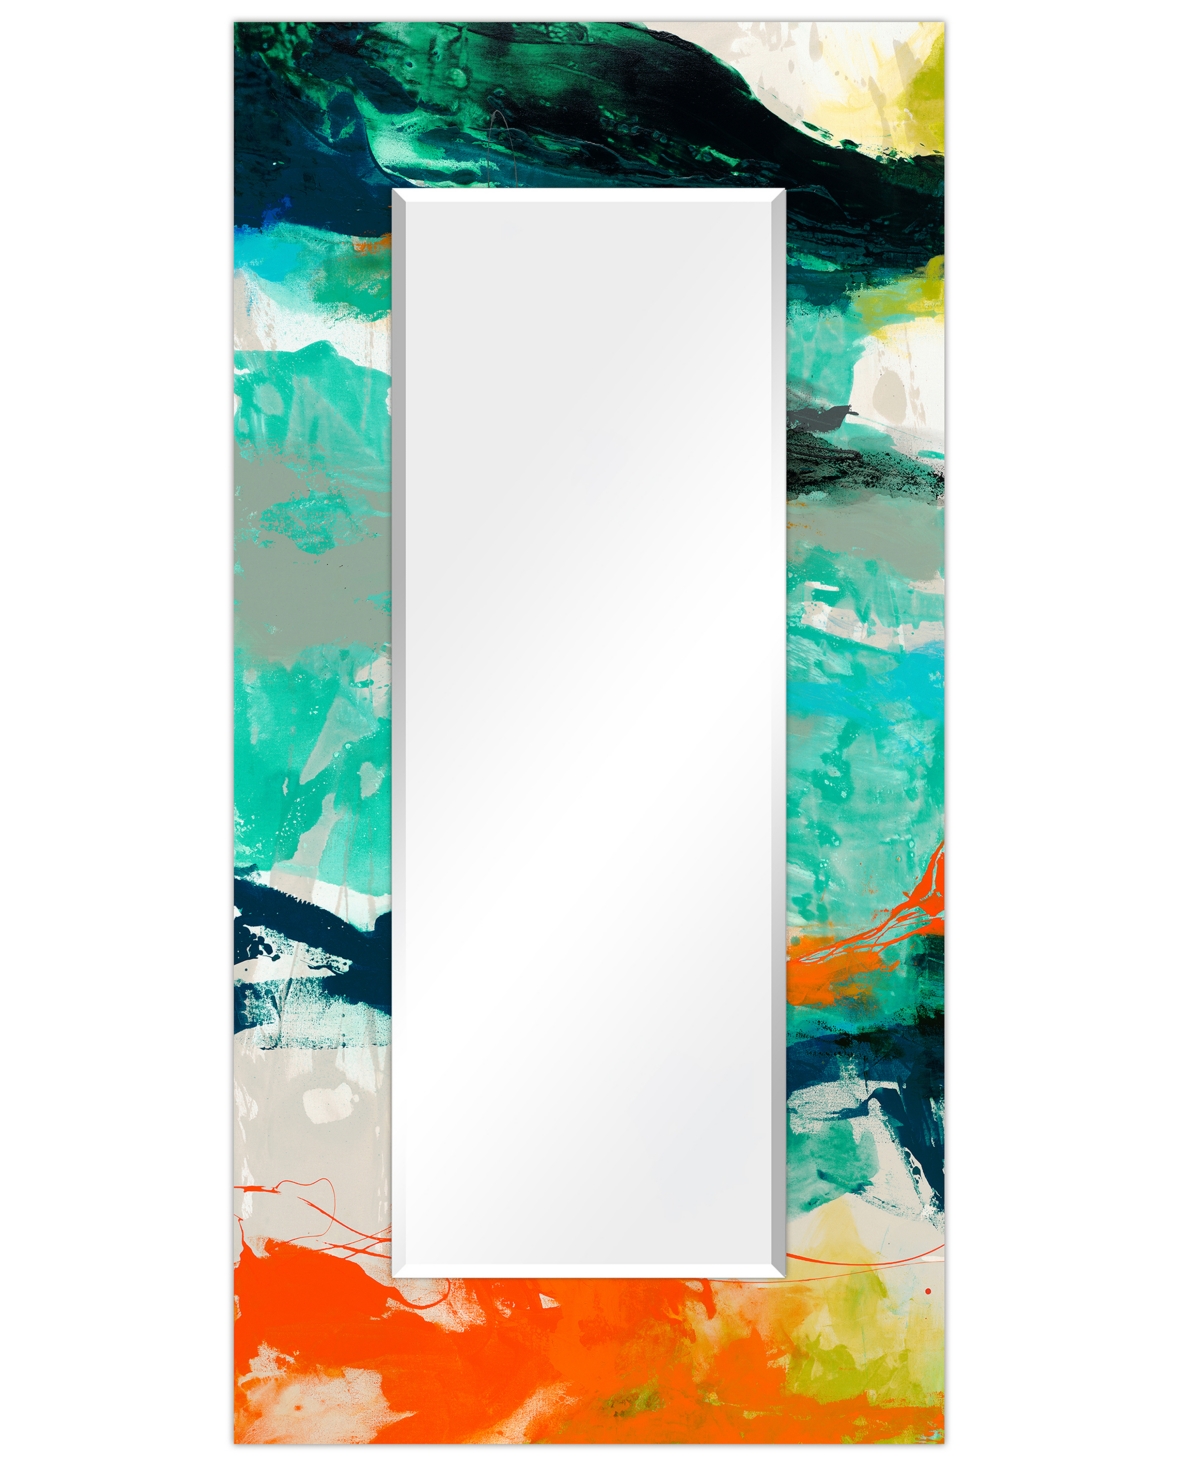 'Tidal Abstract' Rectangular On Free Floating Printed Tempered Art Glass Beveled Mirror, 72" x 36" - Multicolor